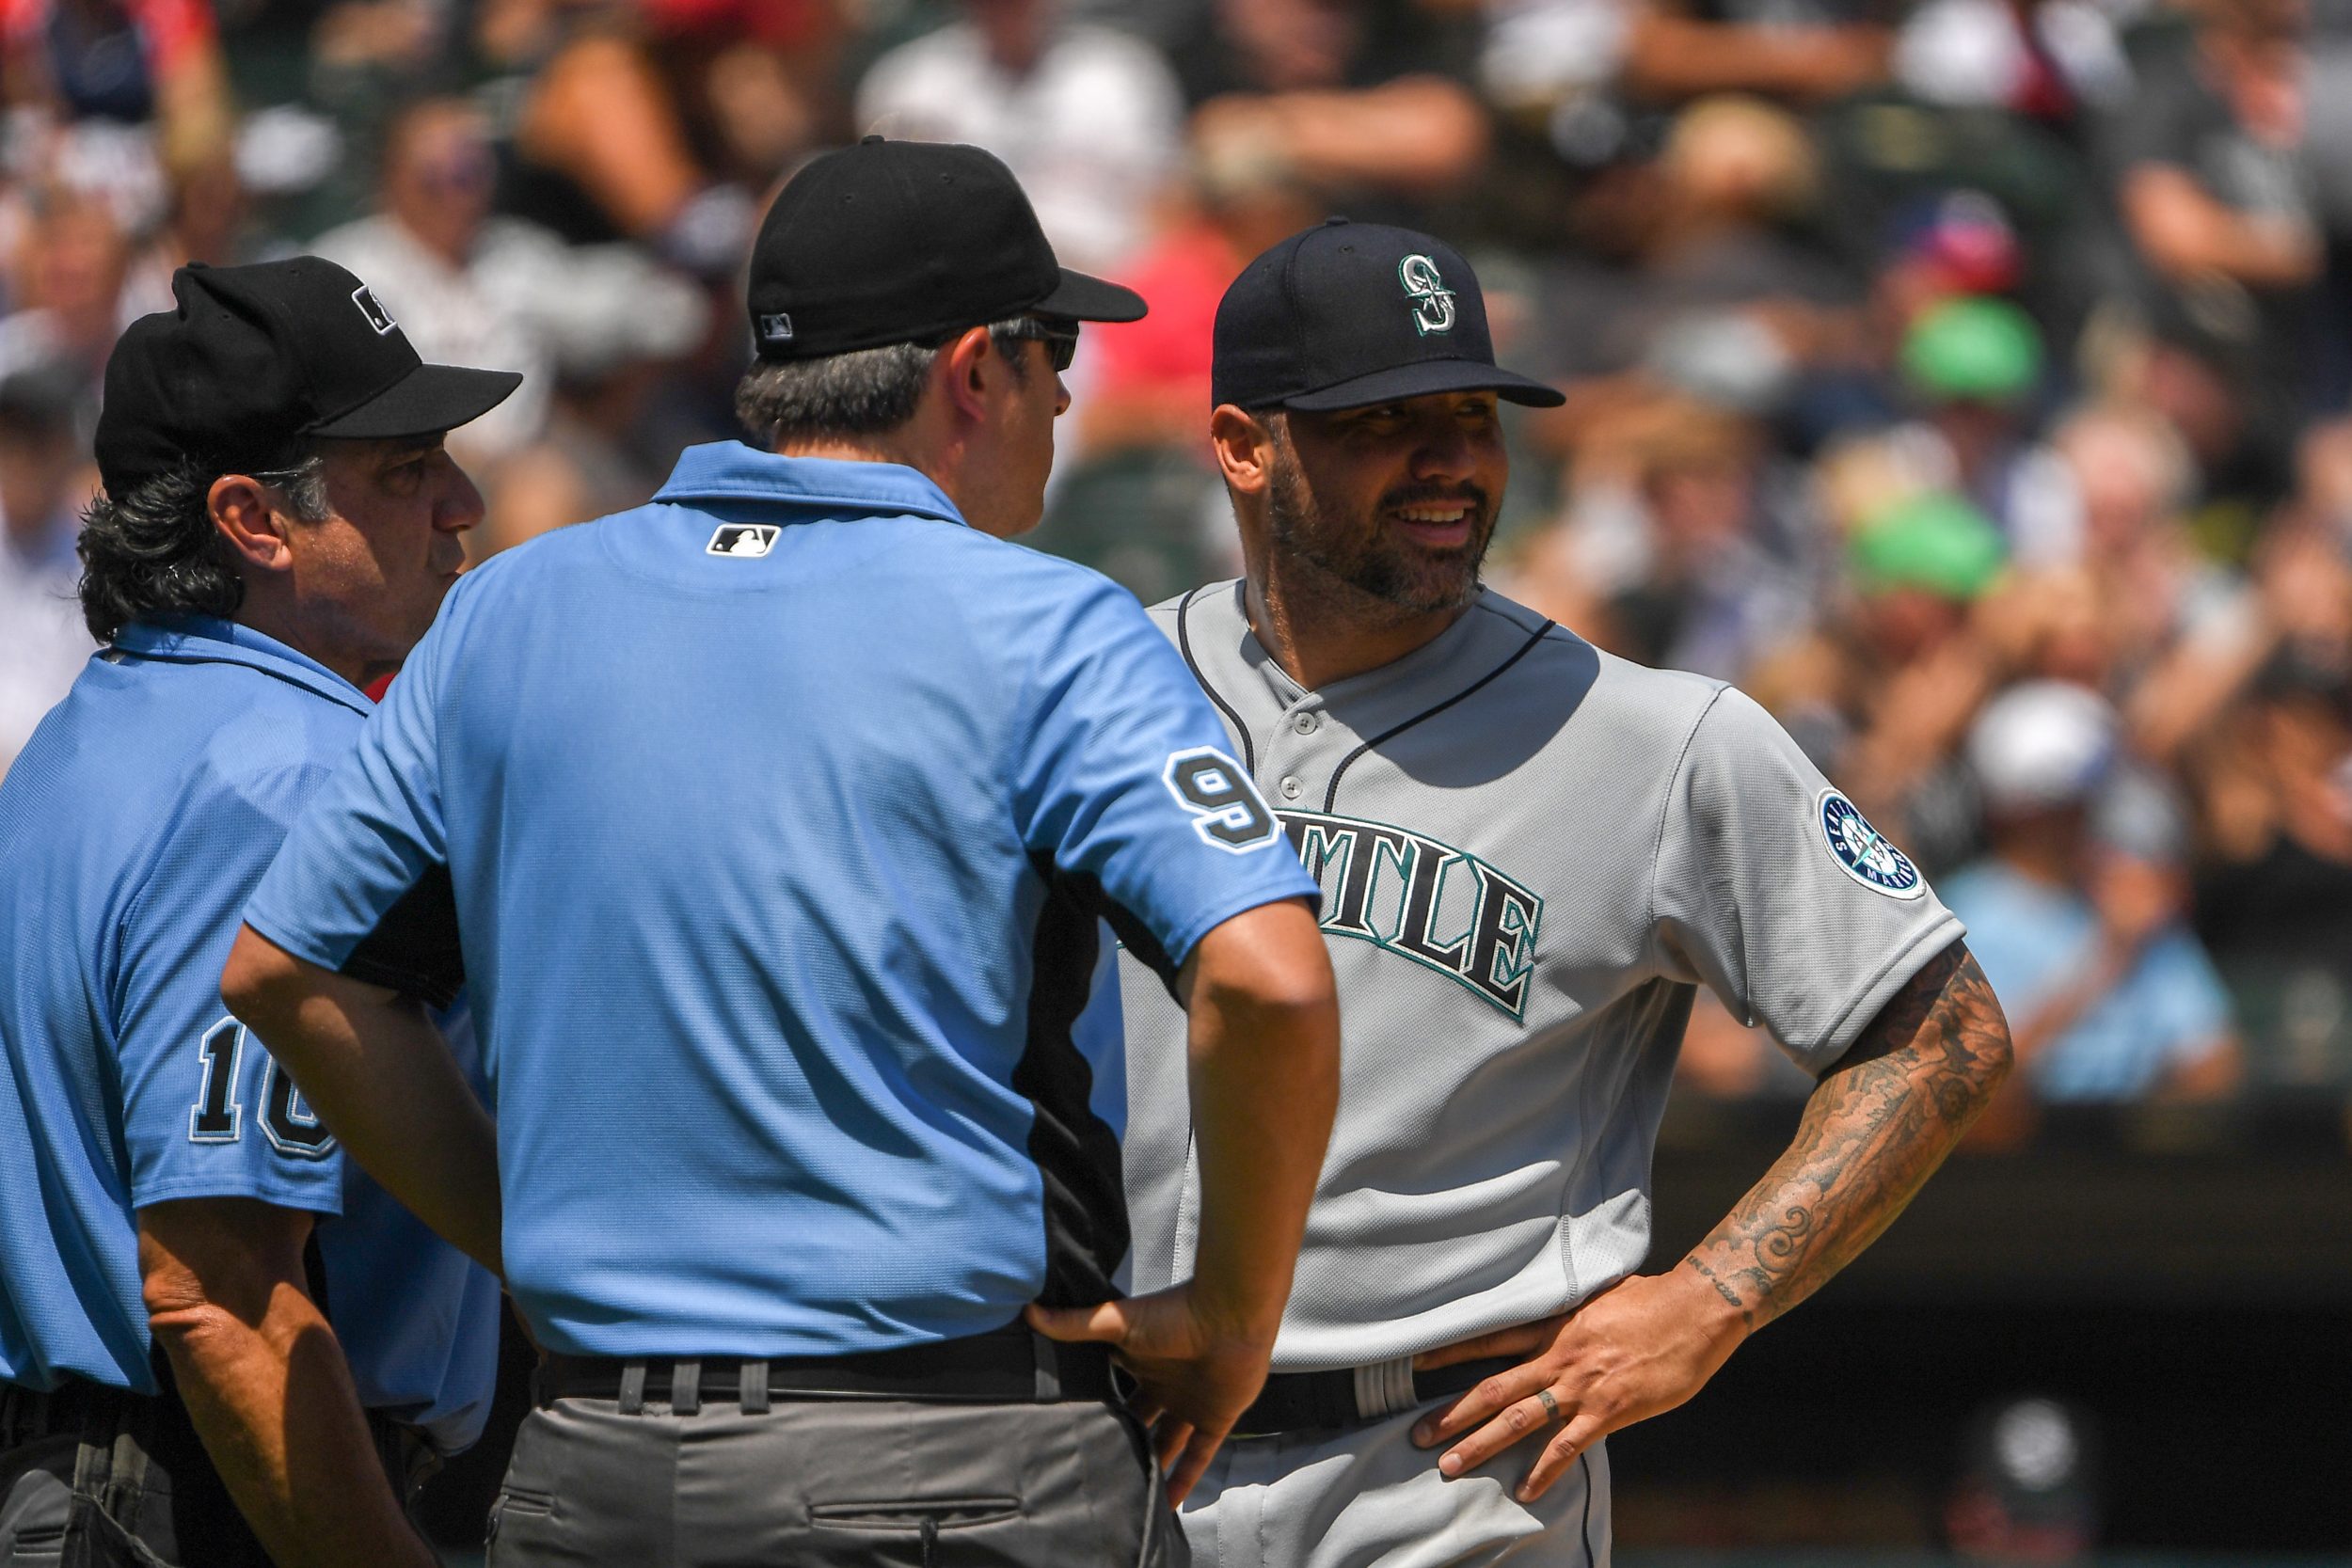 Hector Santiago of the Mariners gets ejected by umpires for having slime inside his glove.